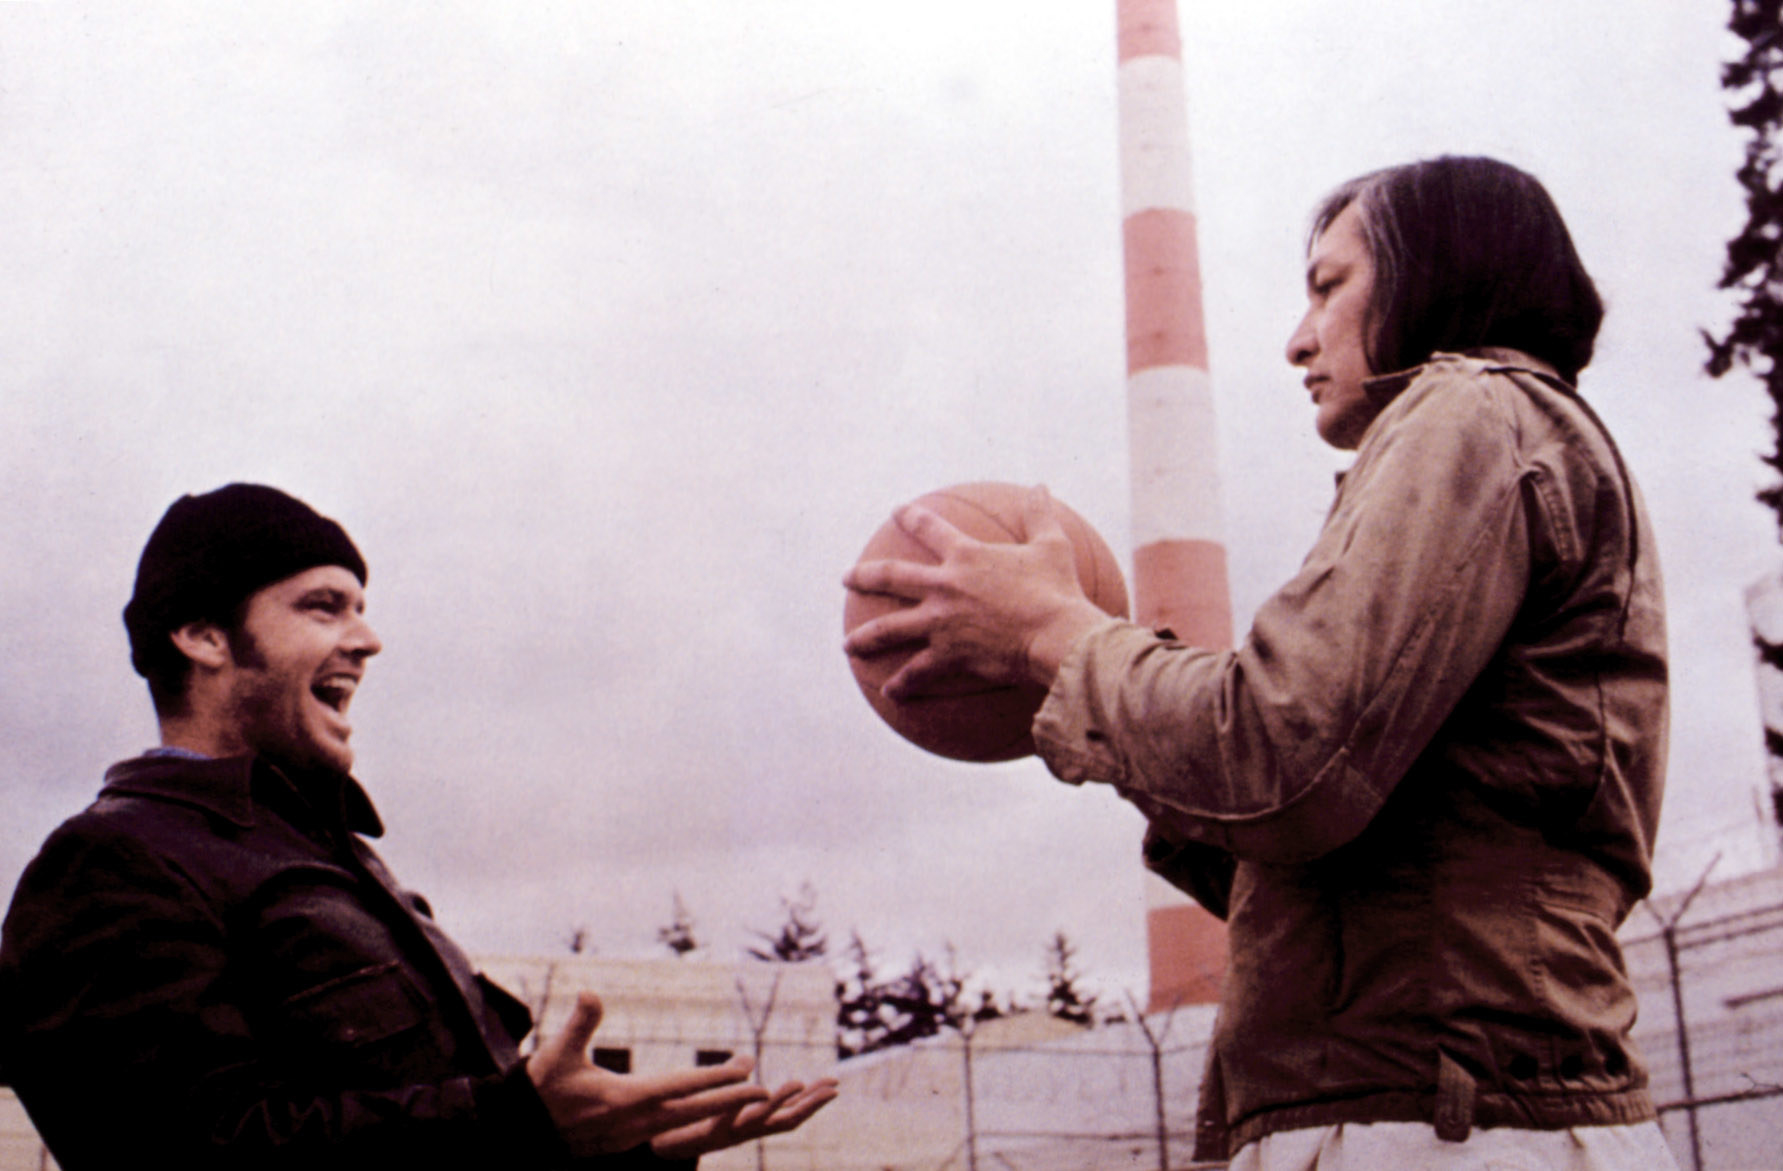 McMurphy and the Chief playing basketball